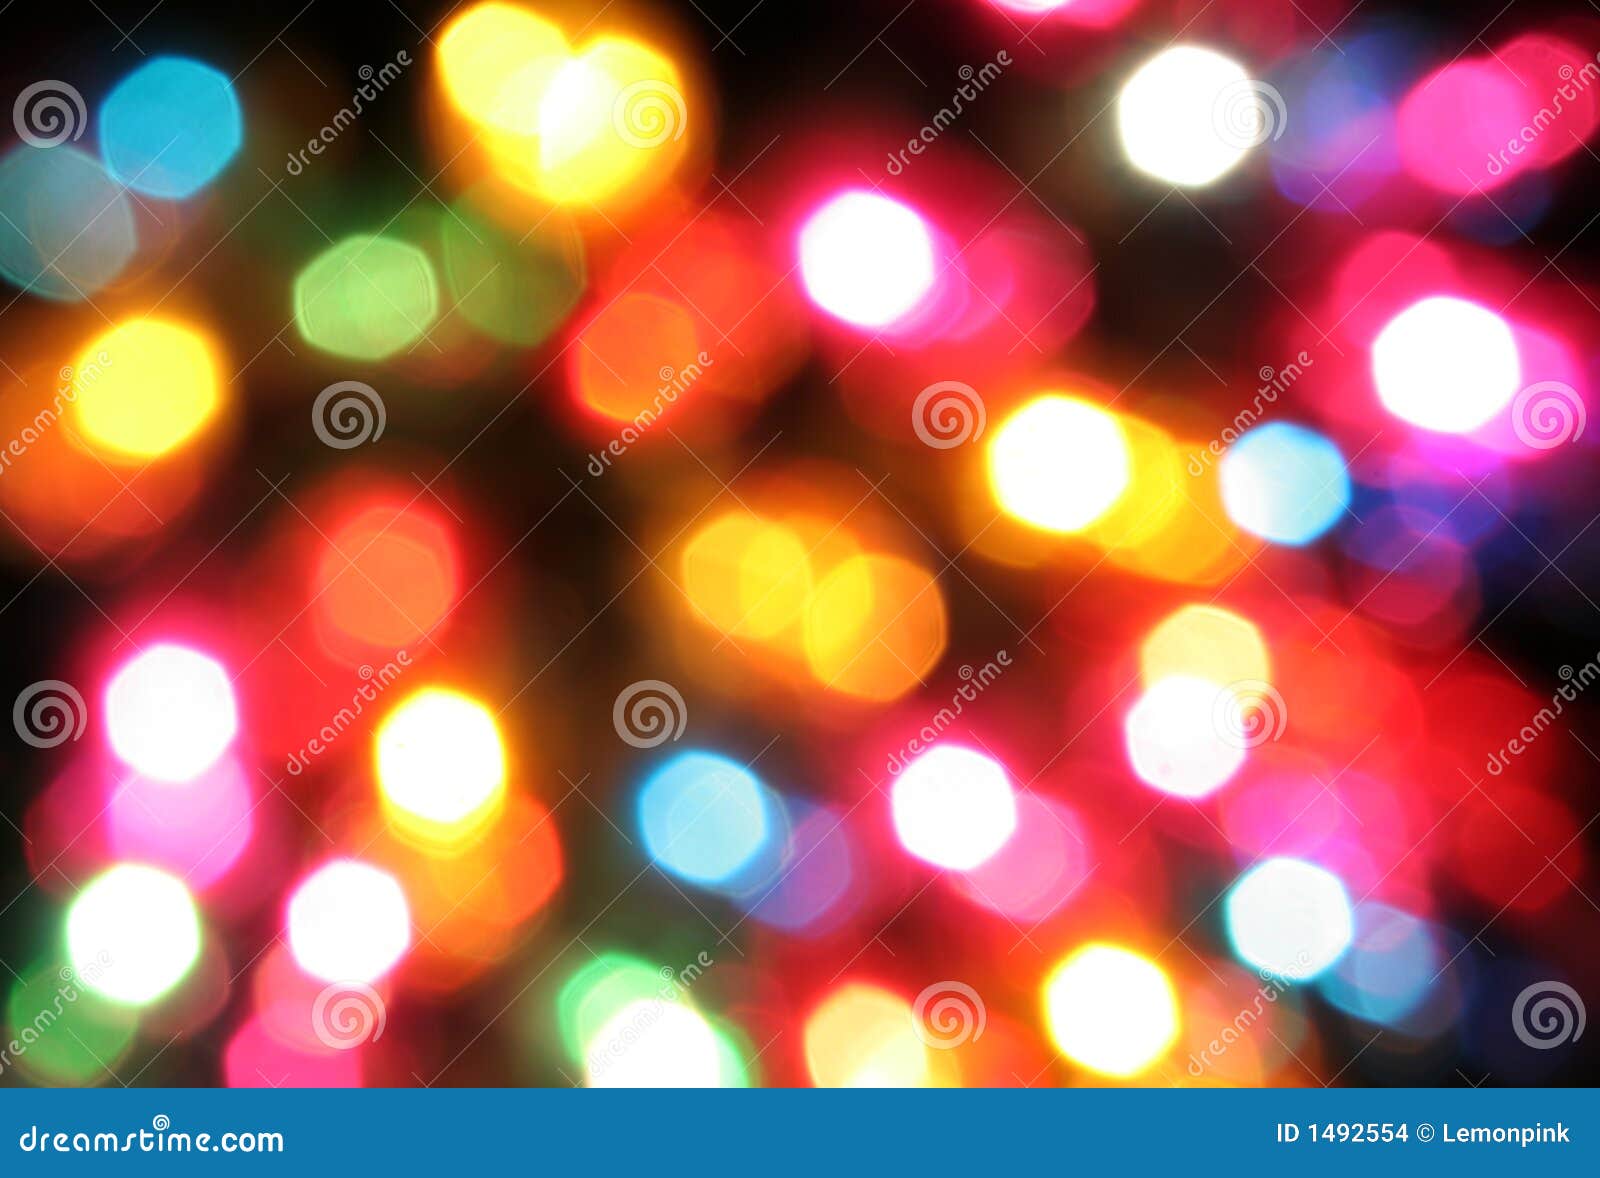 Colored Christmas Lights Stock Images - Image: 1492554